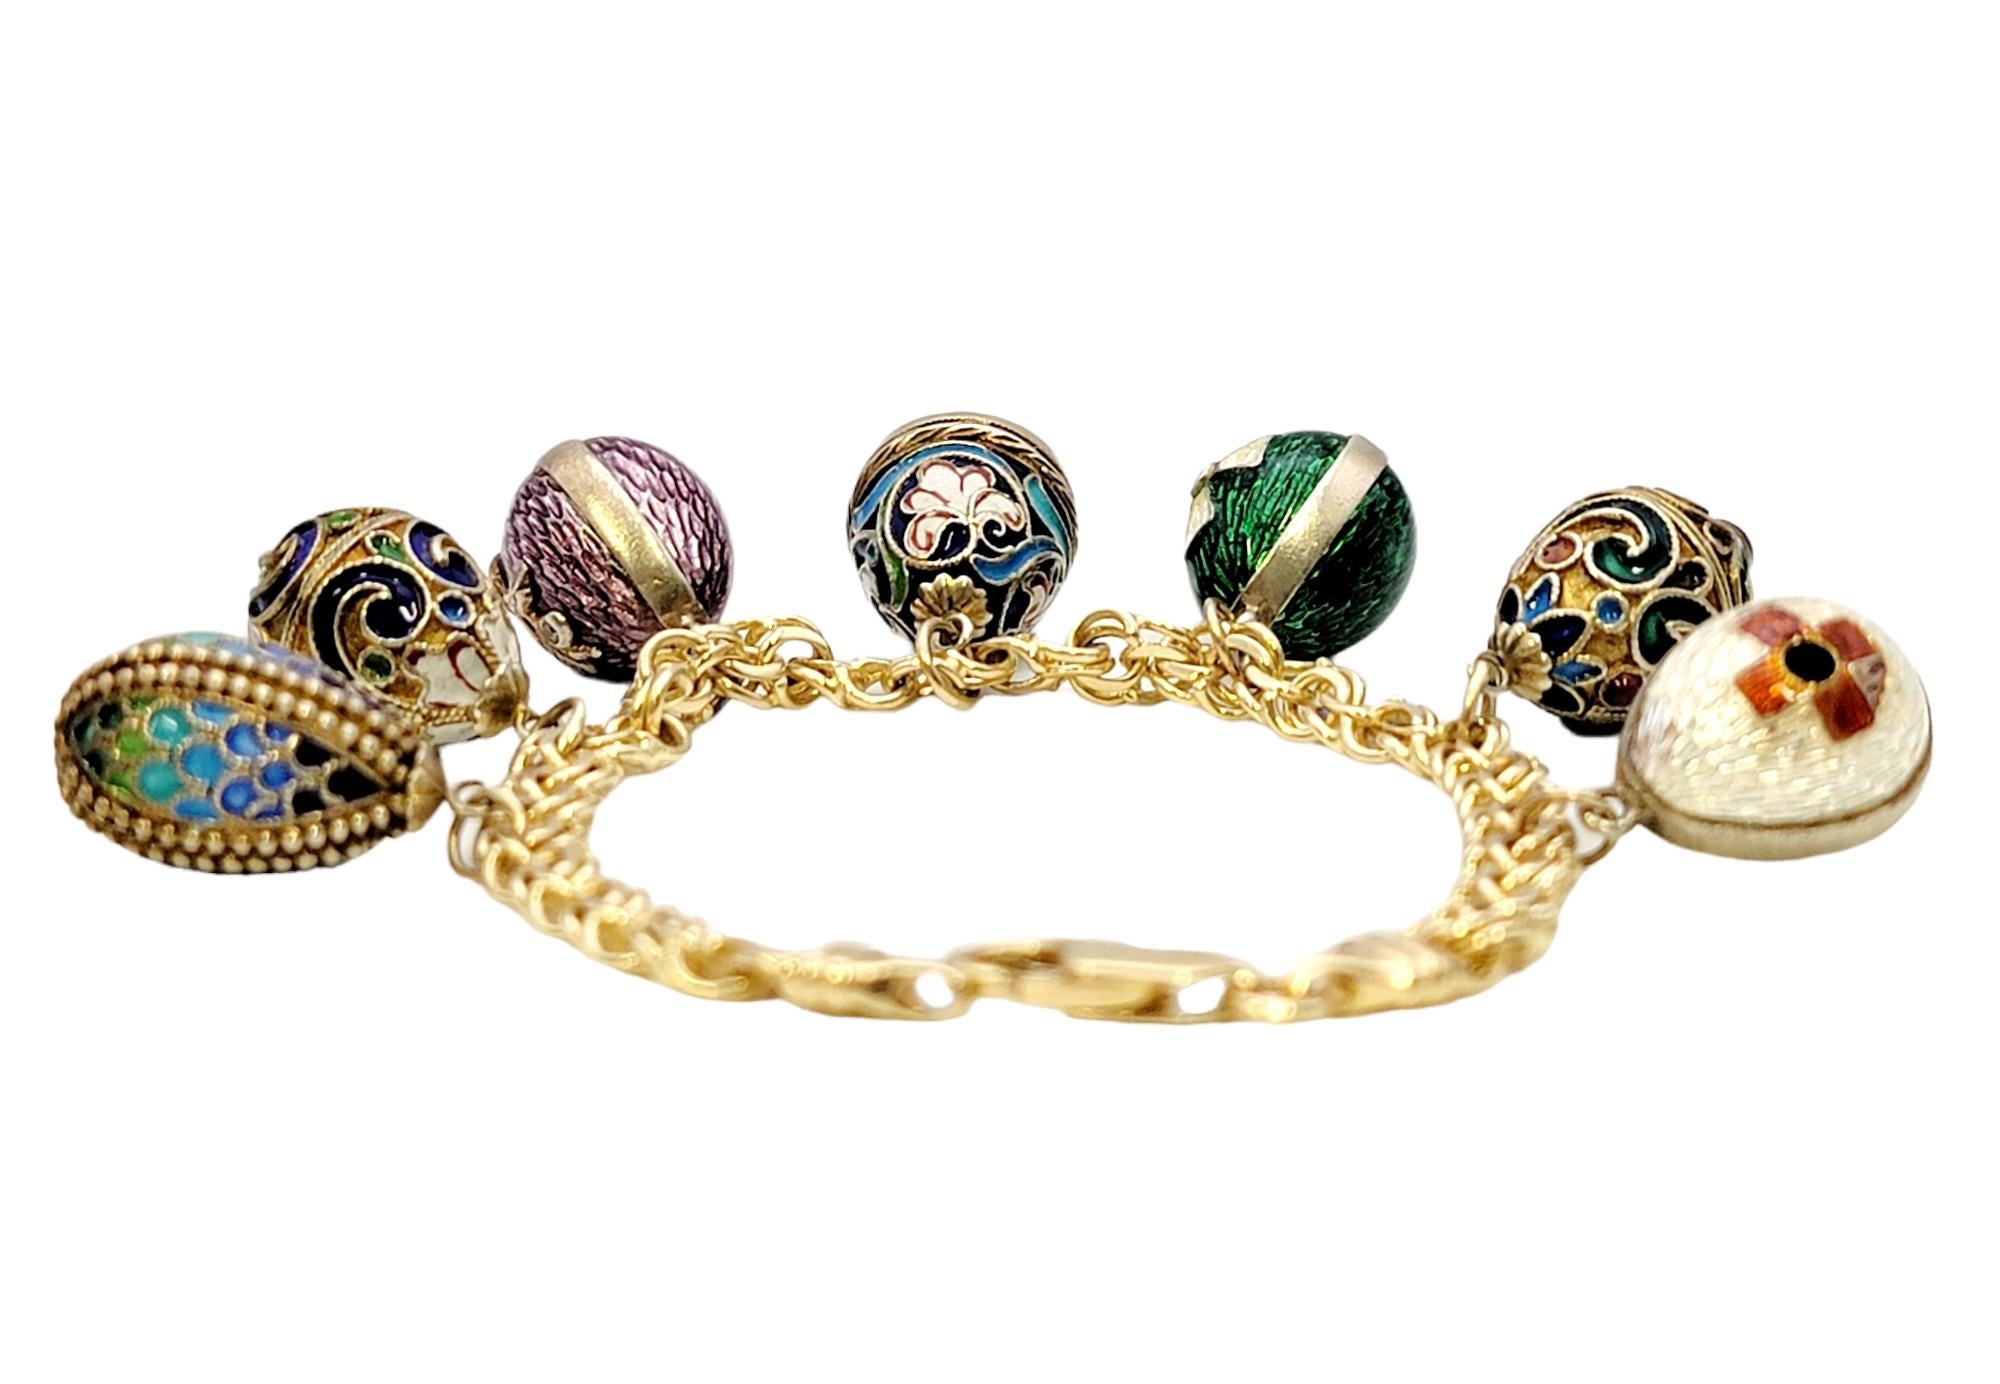 You will absolutely fall in love with this incredible vintage charm bracelet. Featuring 7 colorful egg charms, each one is totally unique in design. Done primarily in colored enamel, a few of the intricately designed eggs also feature gemstones such